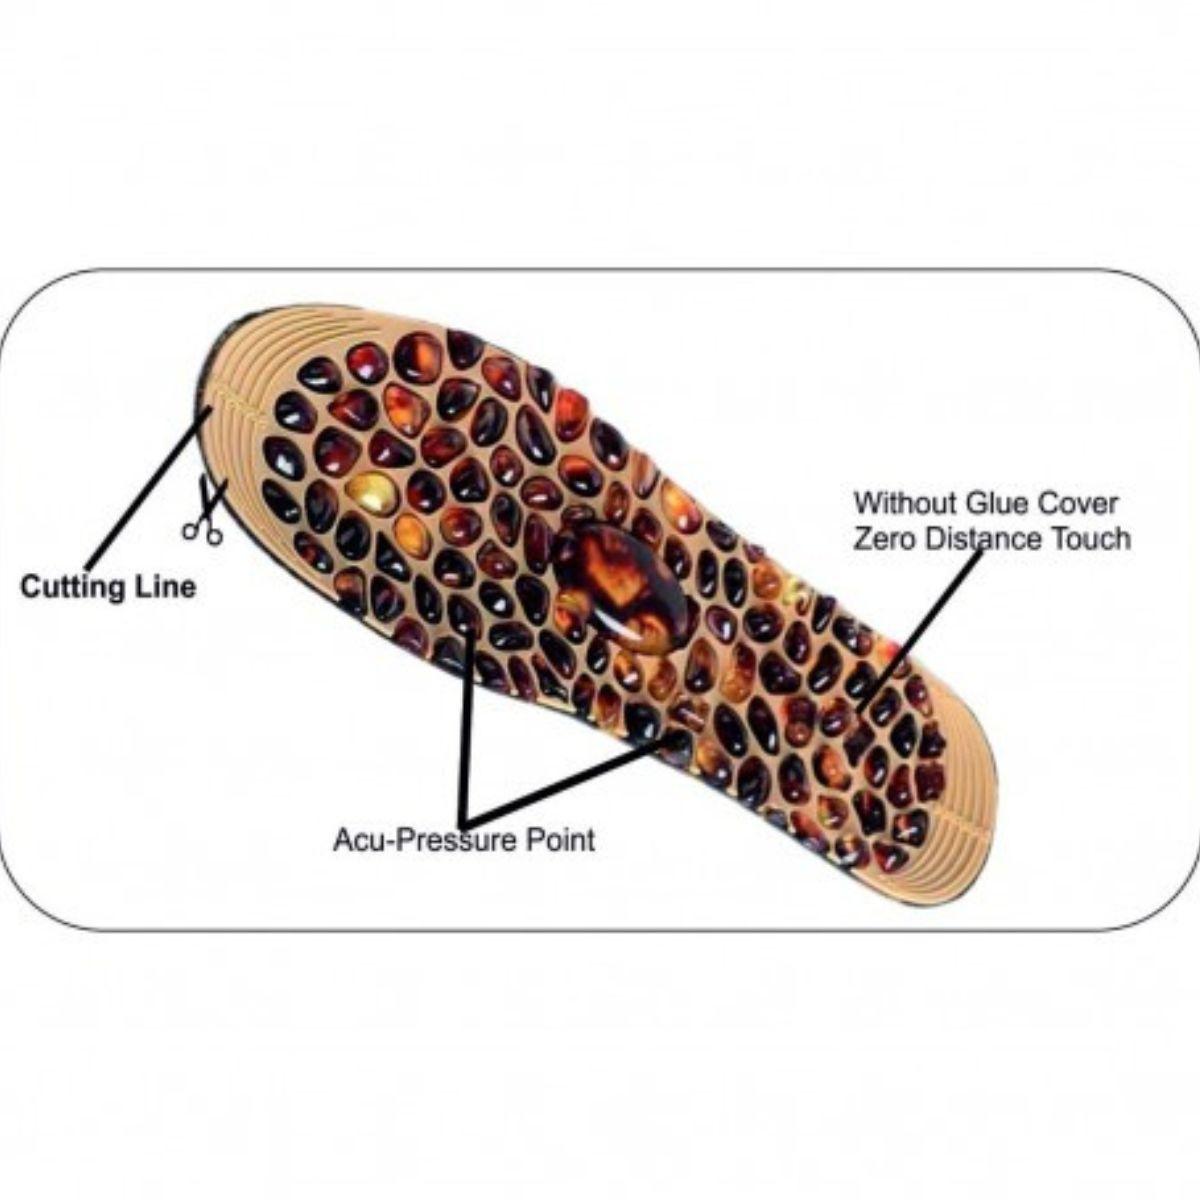 Foot Sole Elite - tcistarhealthproducts